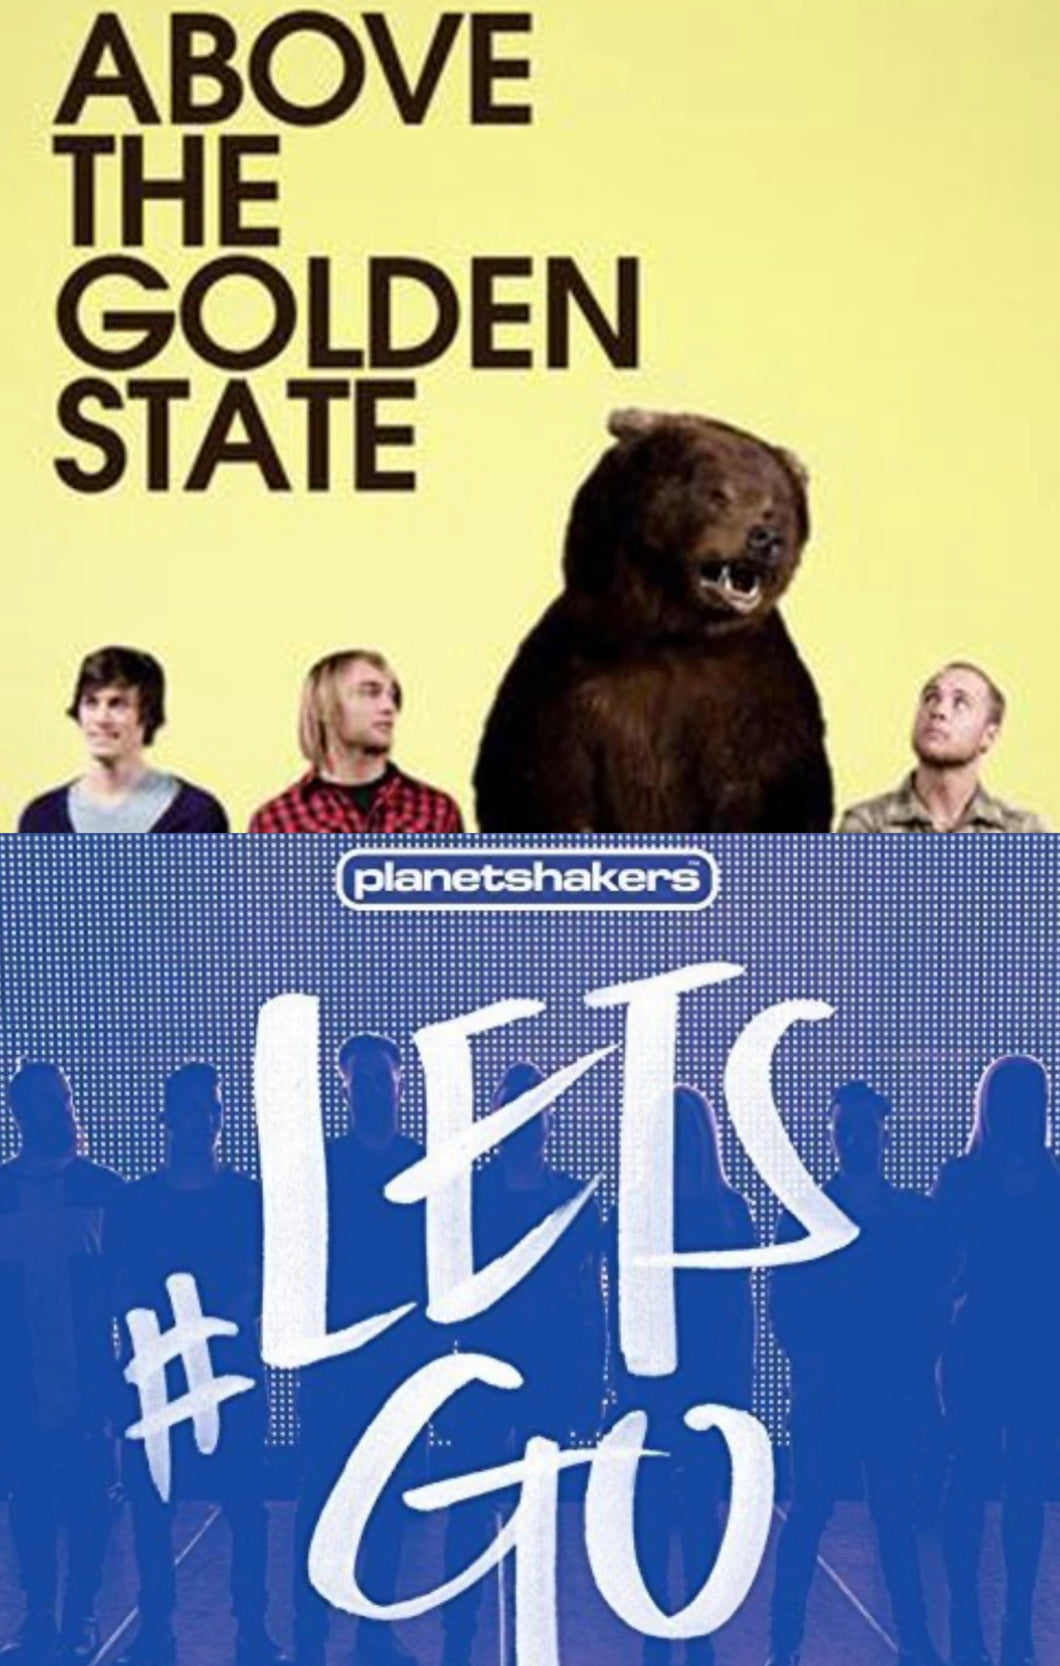 Above the Golden State + Planetshakers #Let's Go 2CD/DVD